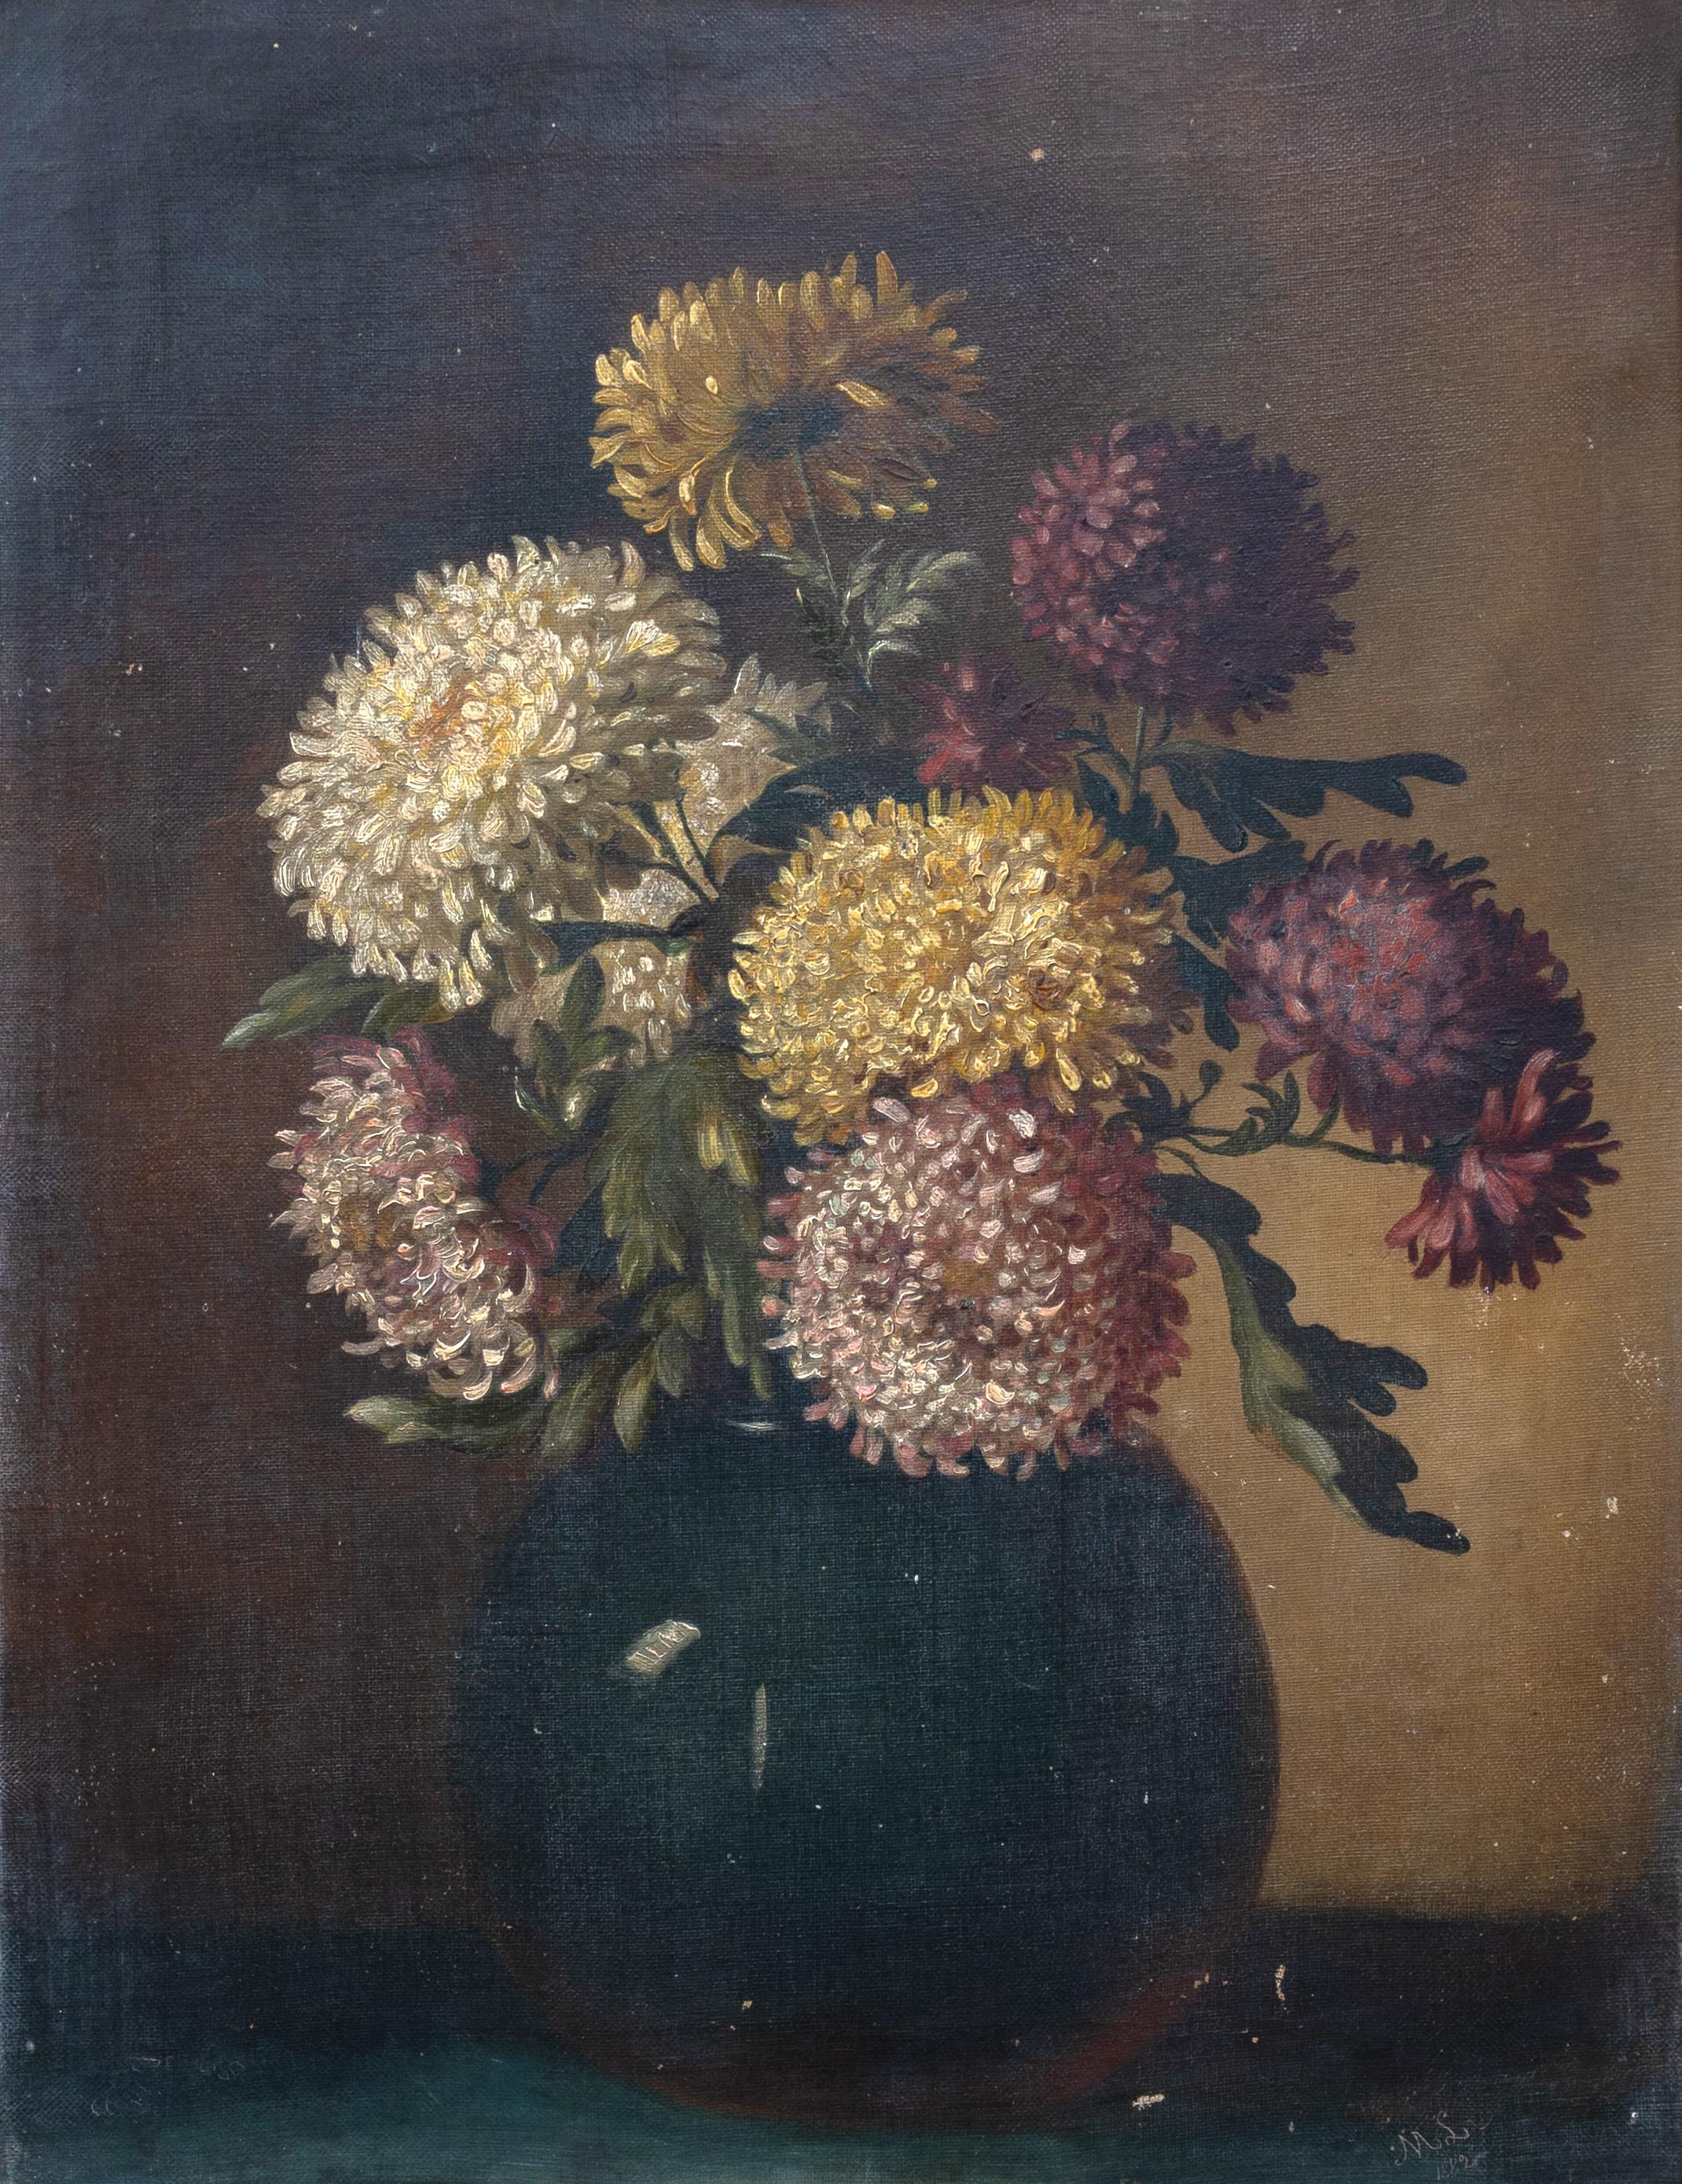 Antique English 19th Century Oil On Canvas Still Life Of chrysanthemums in a vase.
Signed 'M.L' 1889.
Gilt framed.
In good condition, showing some signs of wear commensurate of age.

Dimensions:
Frame: 59cm x 69cm
Picture: 34cm x 45cm